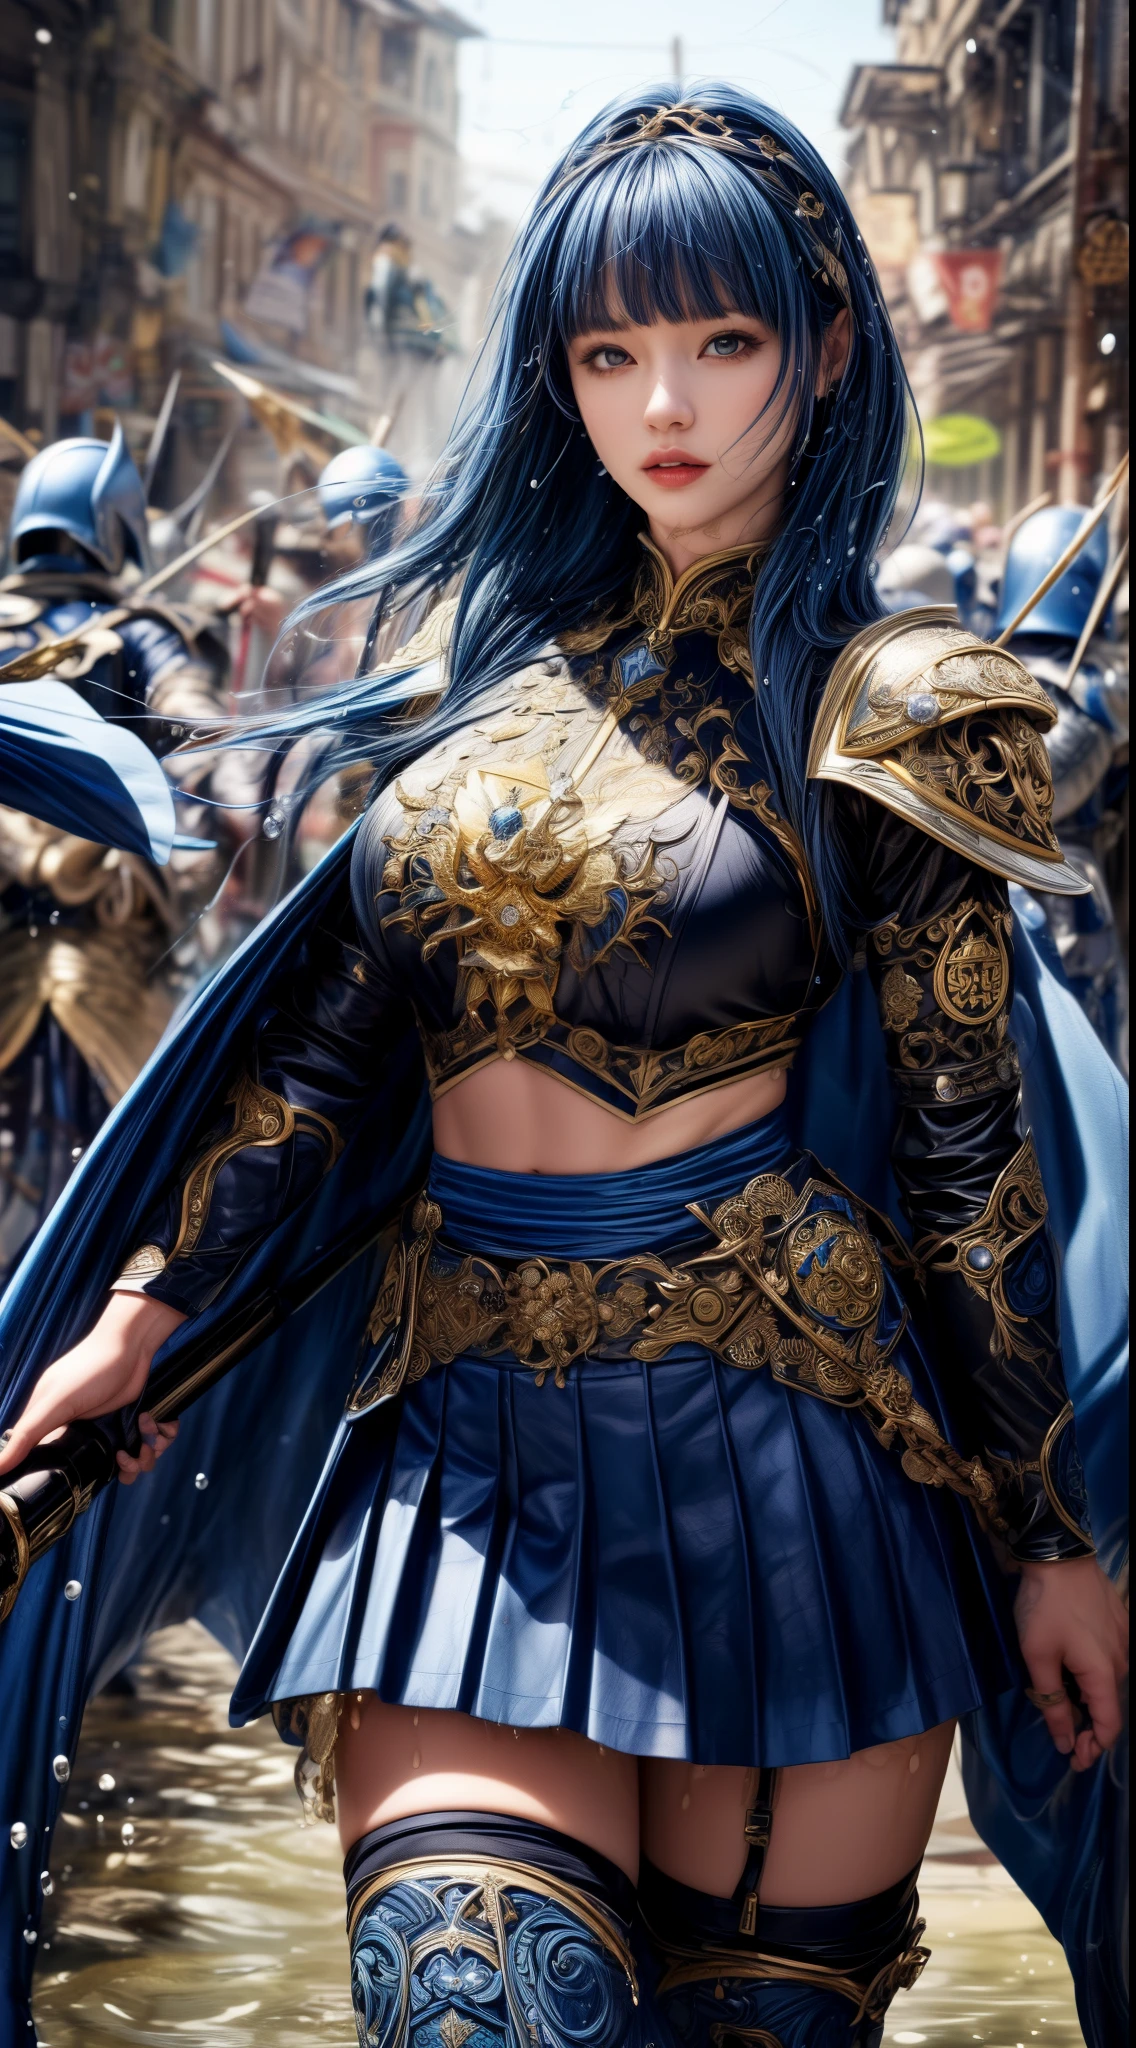 Very beautiful woman、Slender women、(Detailed face)、Realistic Skin、((holy knight)), ((Navy Blue Armor))、((((Black armor with very fine and intricate decoration:1.1))))、((Delicate photo))，(Girl Astepeace RAW Photo Details:1.25), (highest quality:1.6), (超A high resolution:1.5), (Realistic:1.75), 8K resolution, Canon EOS R5, 50mm, Absurd, Ultra-detailed,Cinema Lighting,((battlefield))、((battle))、(((Navy Skirt with Embellishments)))、Thigh-high socks、Shin Guards、((Dark blue hair))、((Bowl cut hairstyle with bangs,))、Get six-pack、Cape、Beautiful Armor、(((Has a huge weapon)))、(In combat)、The wind is blowing、((Symmetrical Armor))、((((Splash))))、(((Leading a large group of blue knights:1.2)))、Banner、Armor with a dragon motif、(((Battle Scene)))